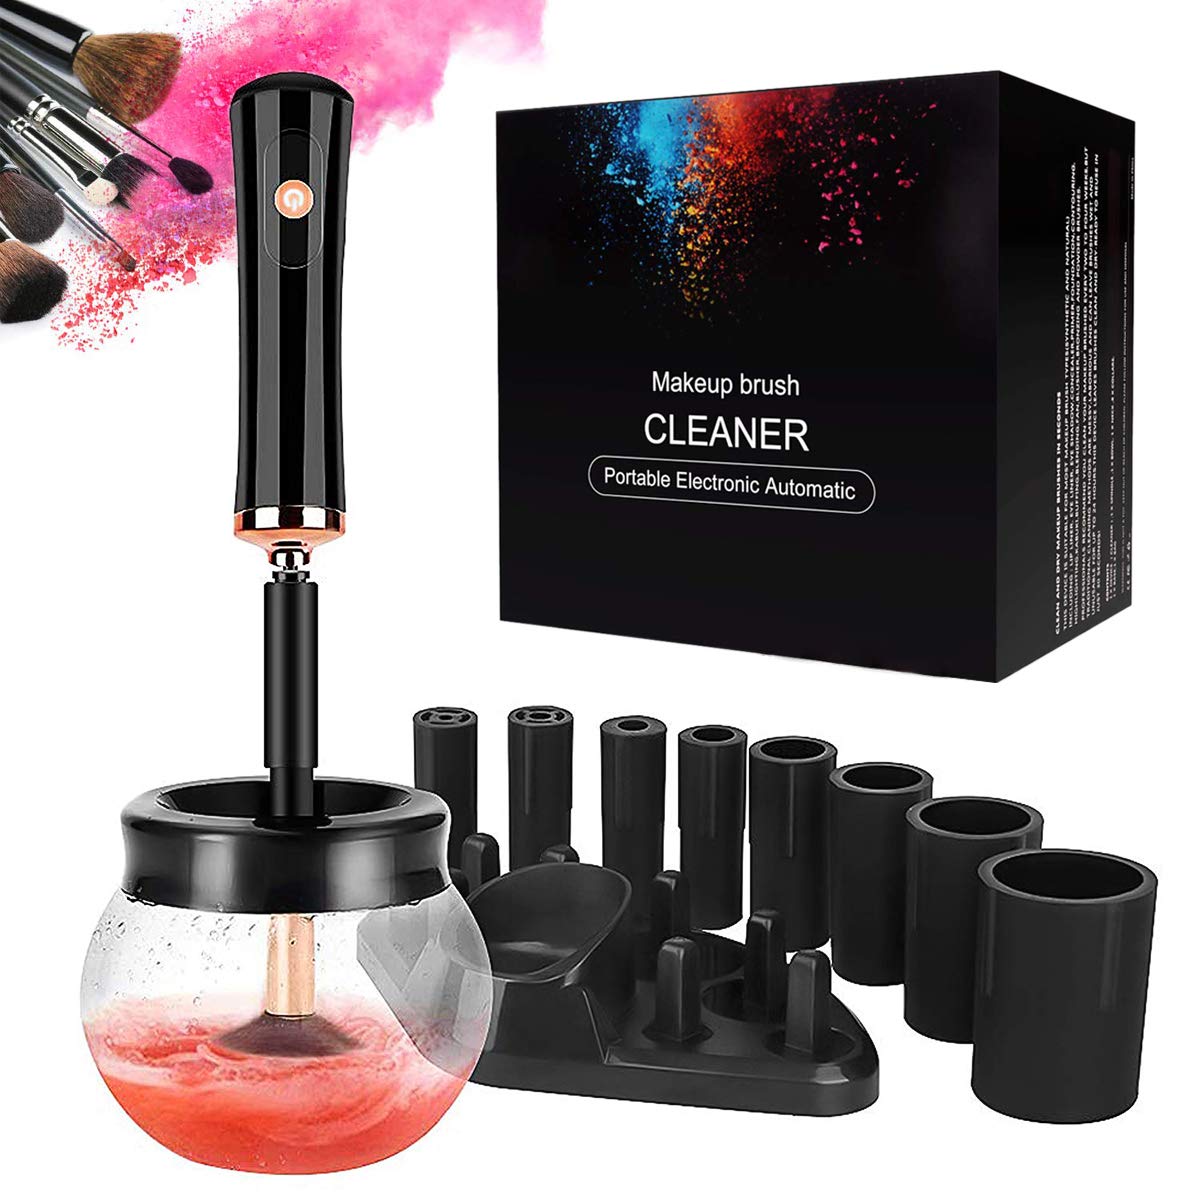 The Professional Makeup Brush Cleaning Tool